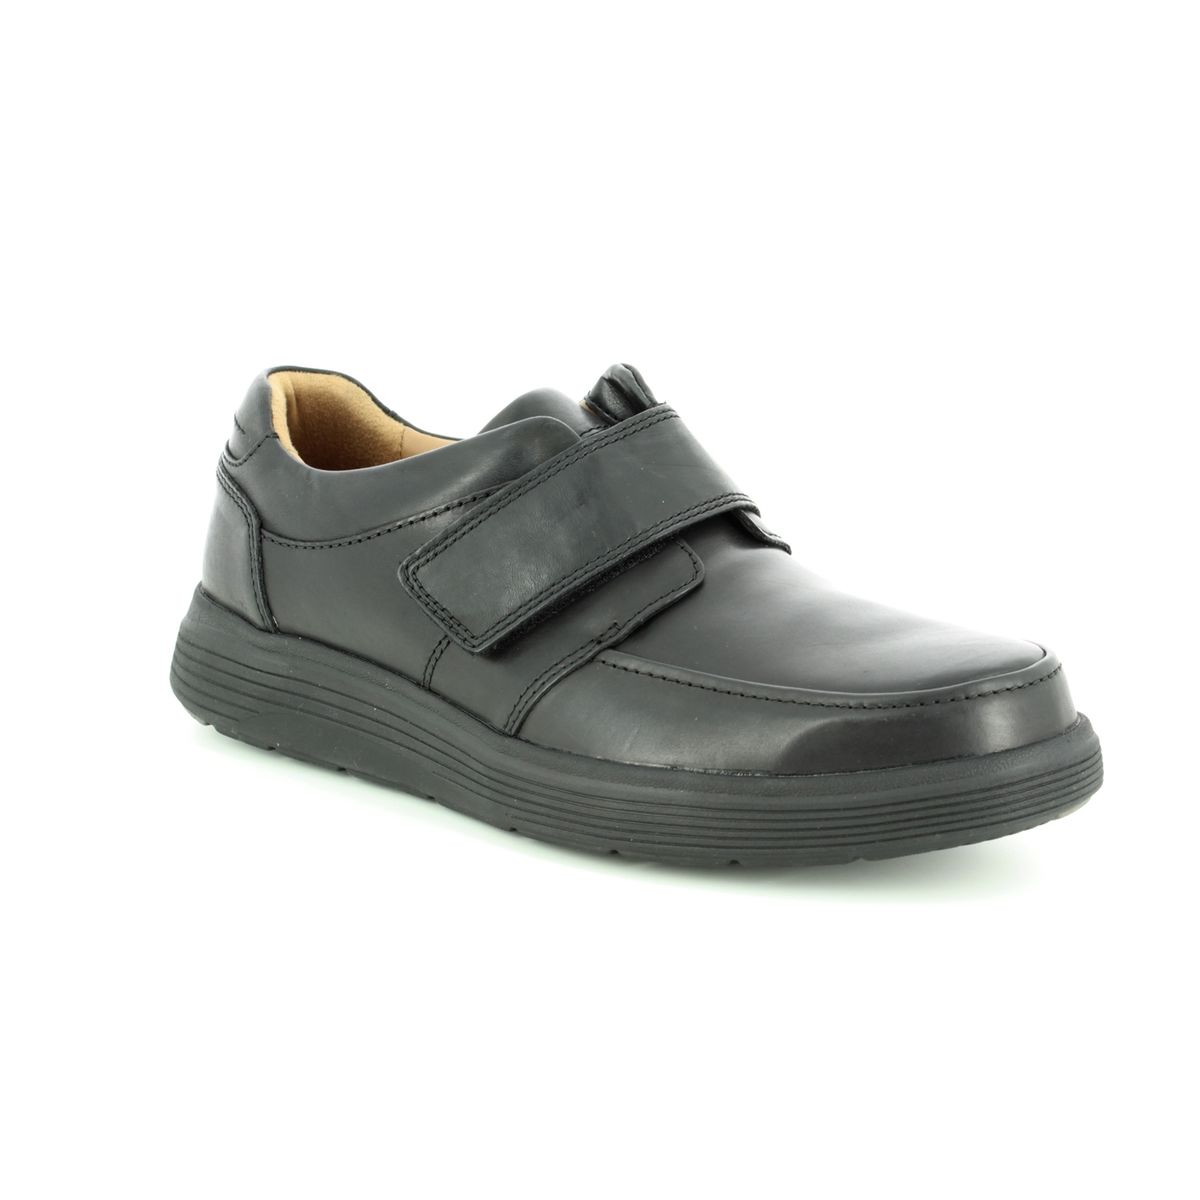 Clarks Un Abode Strap Black Leather Mens Comfort Shoes 3698-68H In Size 11 In Plain Black Leather H Width Fitting Extra Wide